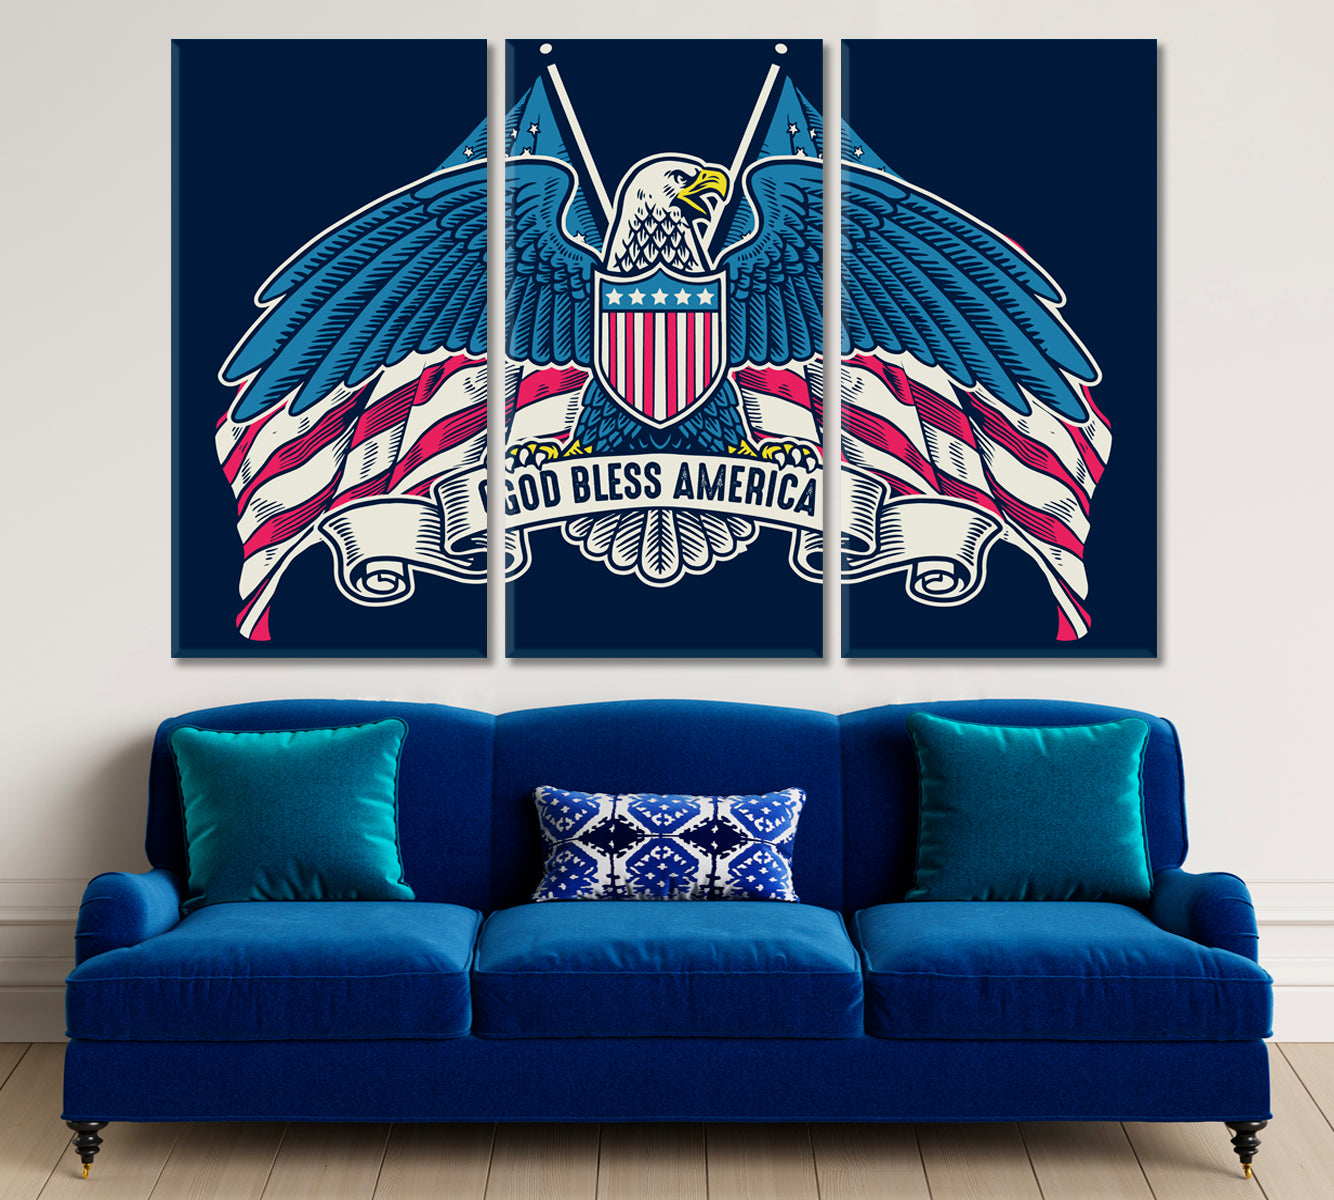 GOD BLESS AMERICA Eagle Wings American Flag Vintage Style Poster Posters, Flags Giclee Print Artesty 3 panels 36" x 24" 